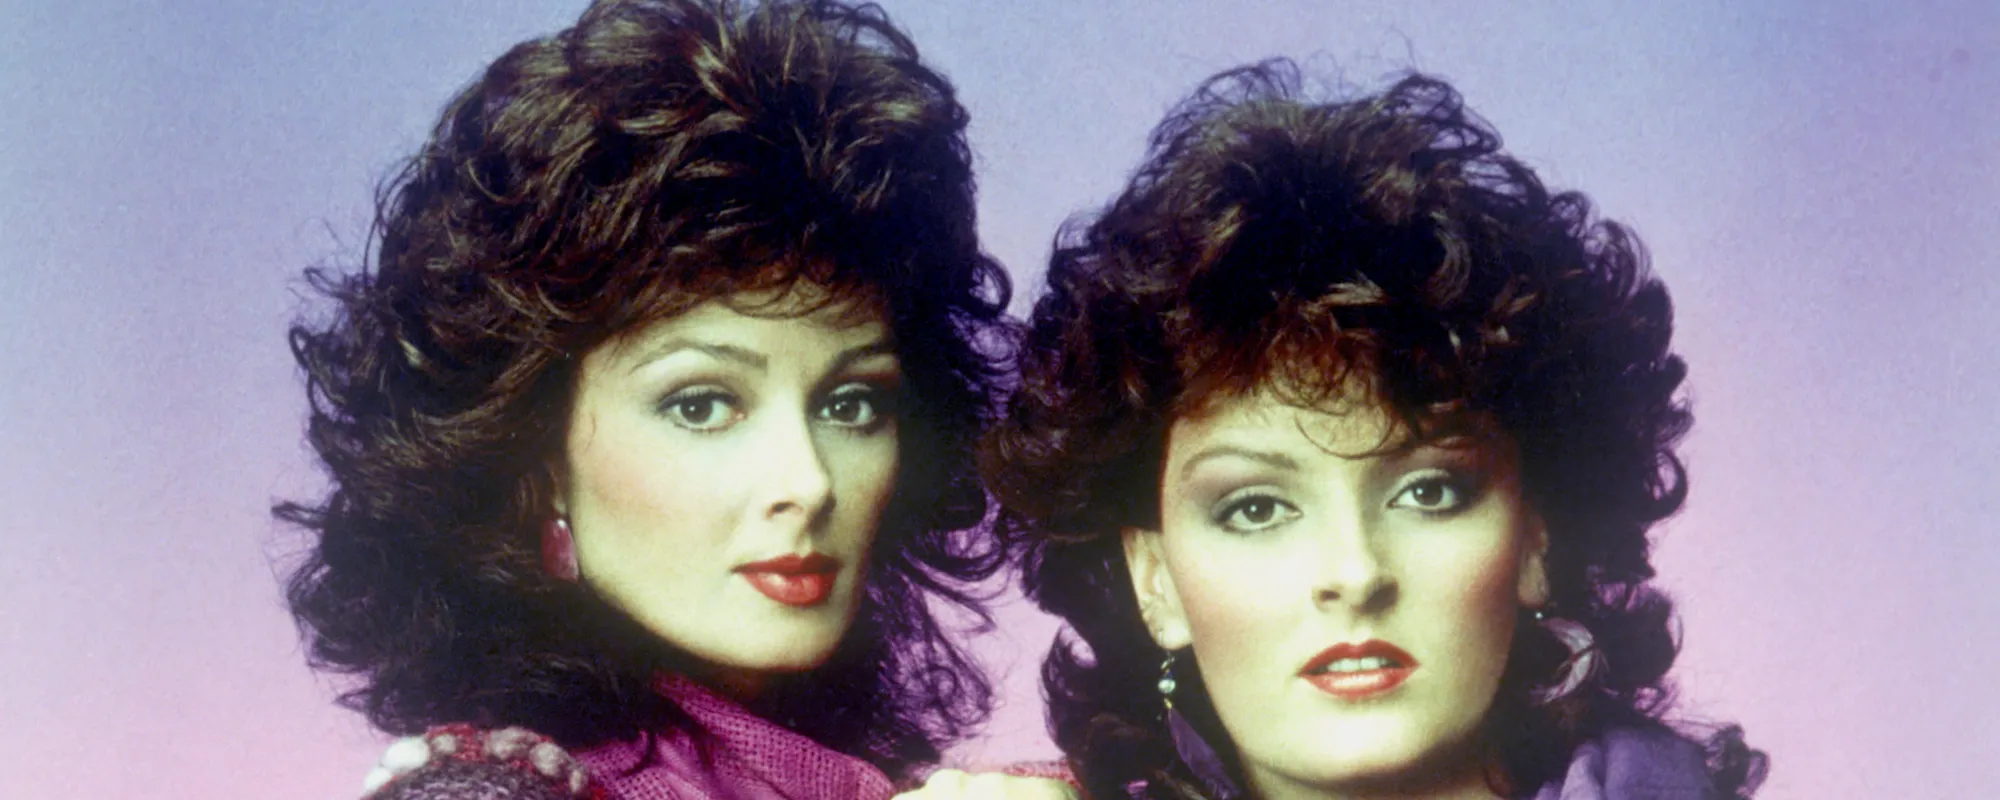 6 Songs You Didn’t Know Naomi Judd Wrote for The Judds and Wynonna